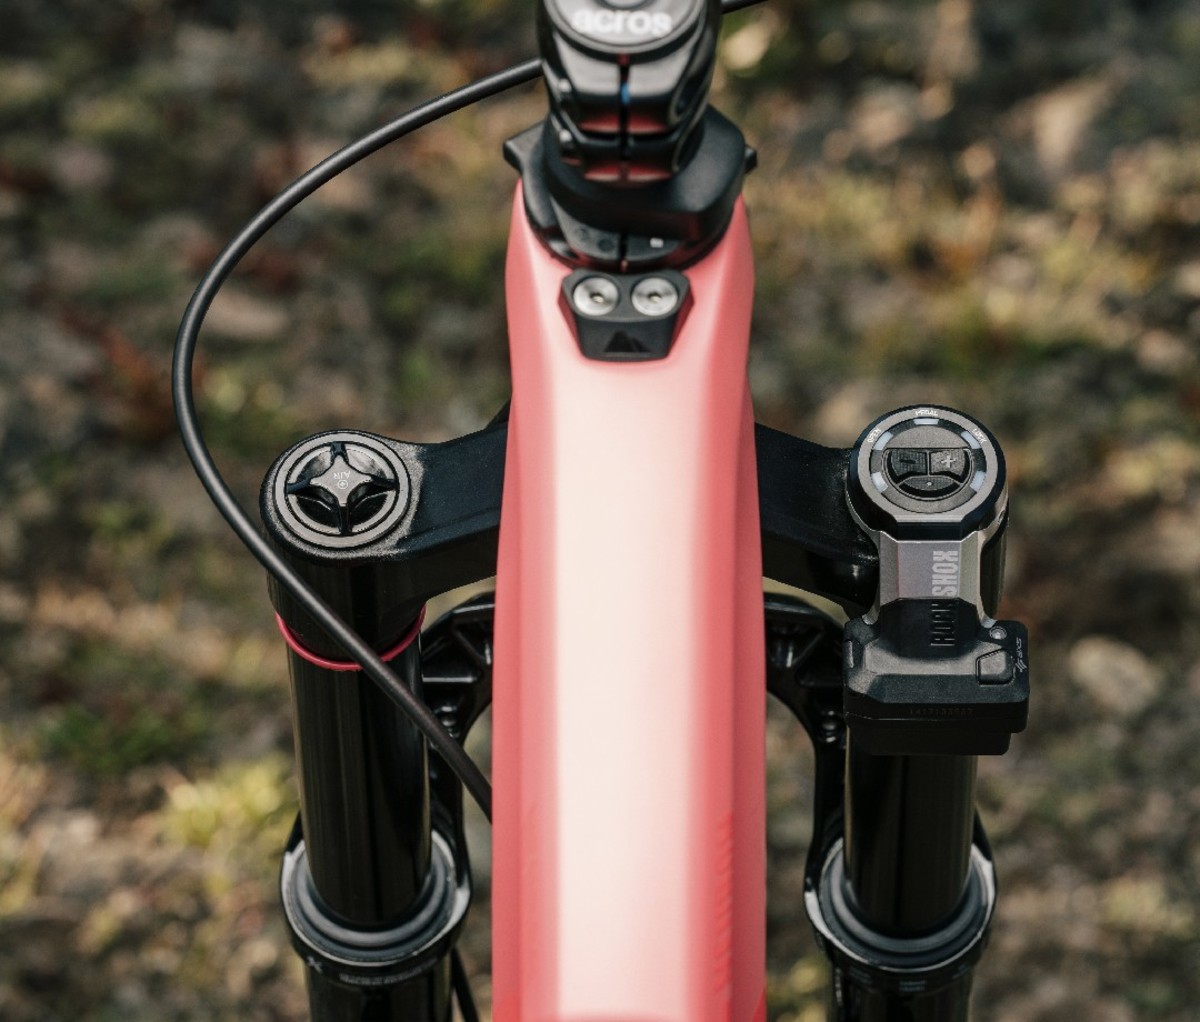 Red bike with shock absorbers and sensors